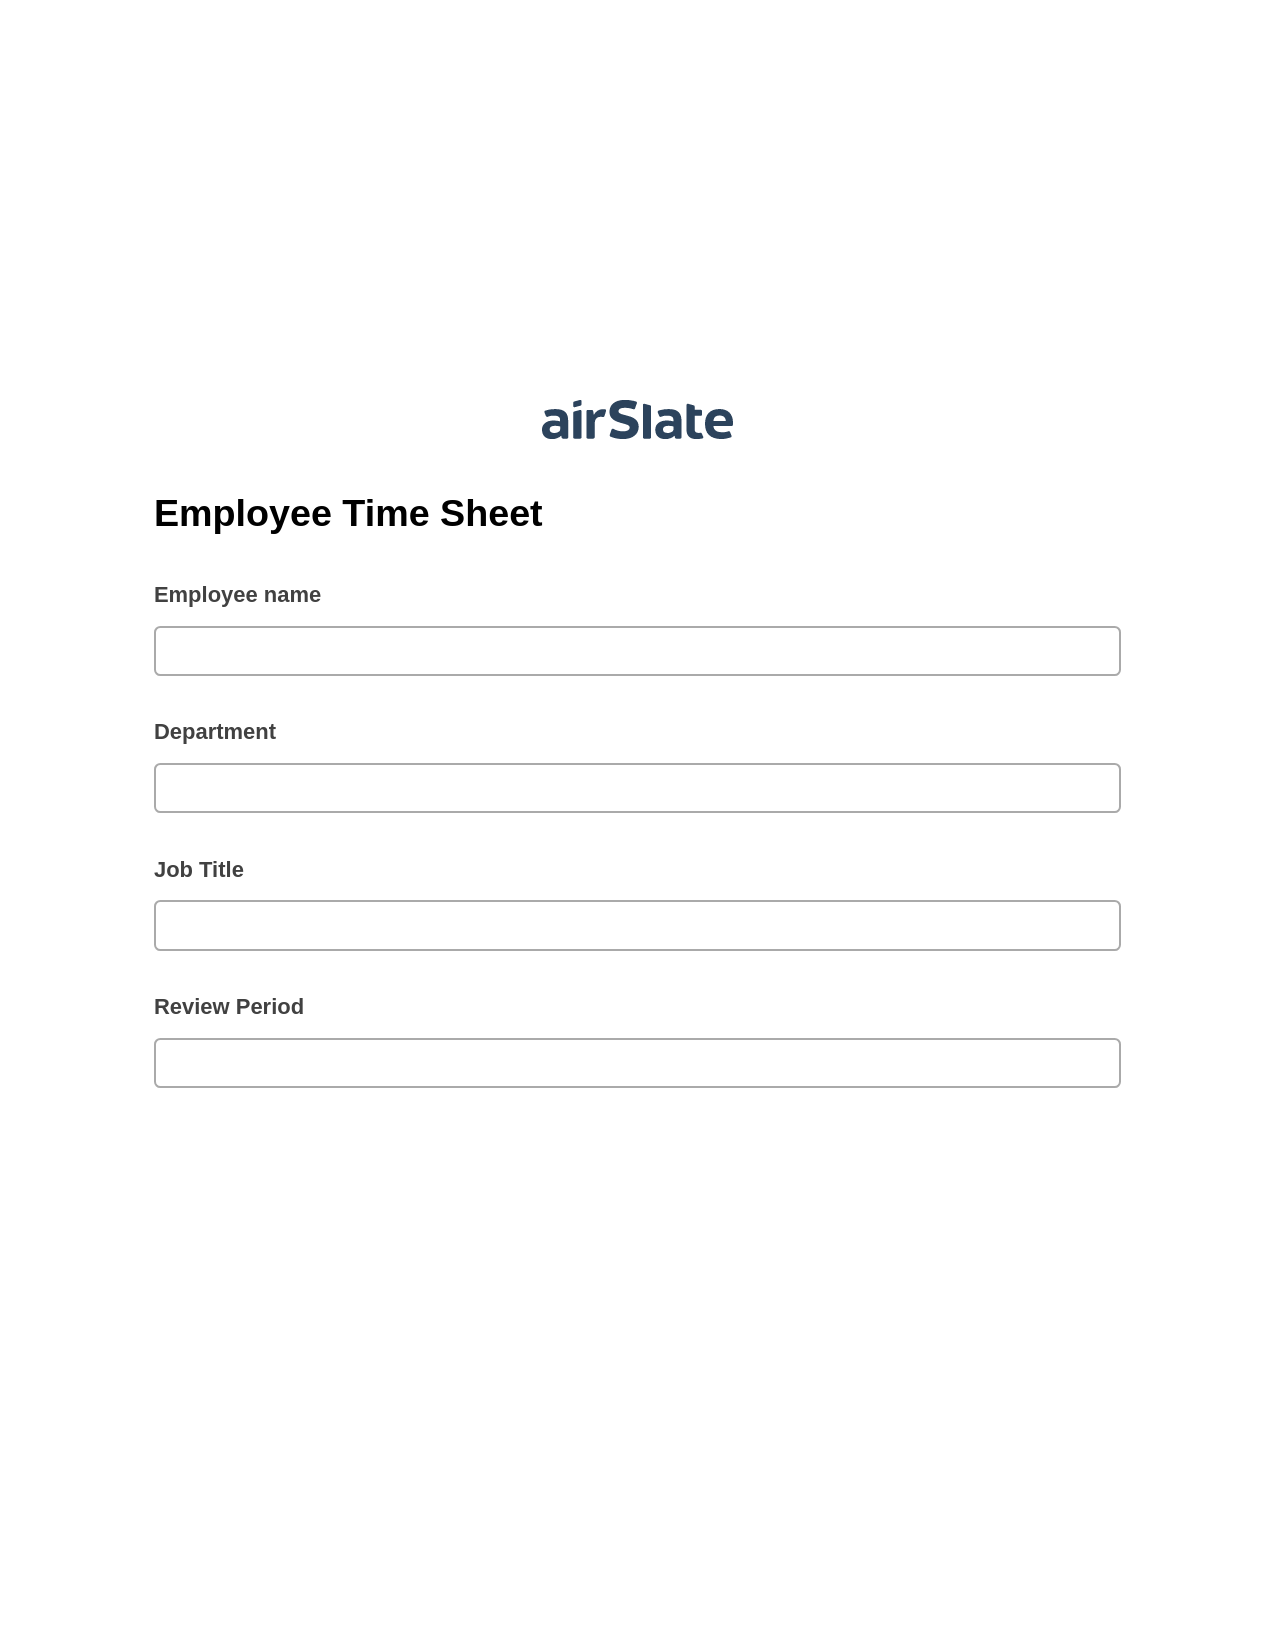 Employee Time Sheet Pre-fill Dropdowns from Google Sheet Bot, Update MS Dynamics 365 Record Bot, Export to Excel 365 Bot